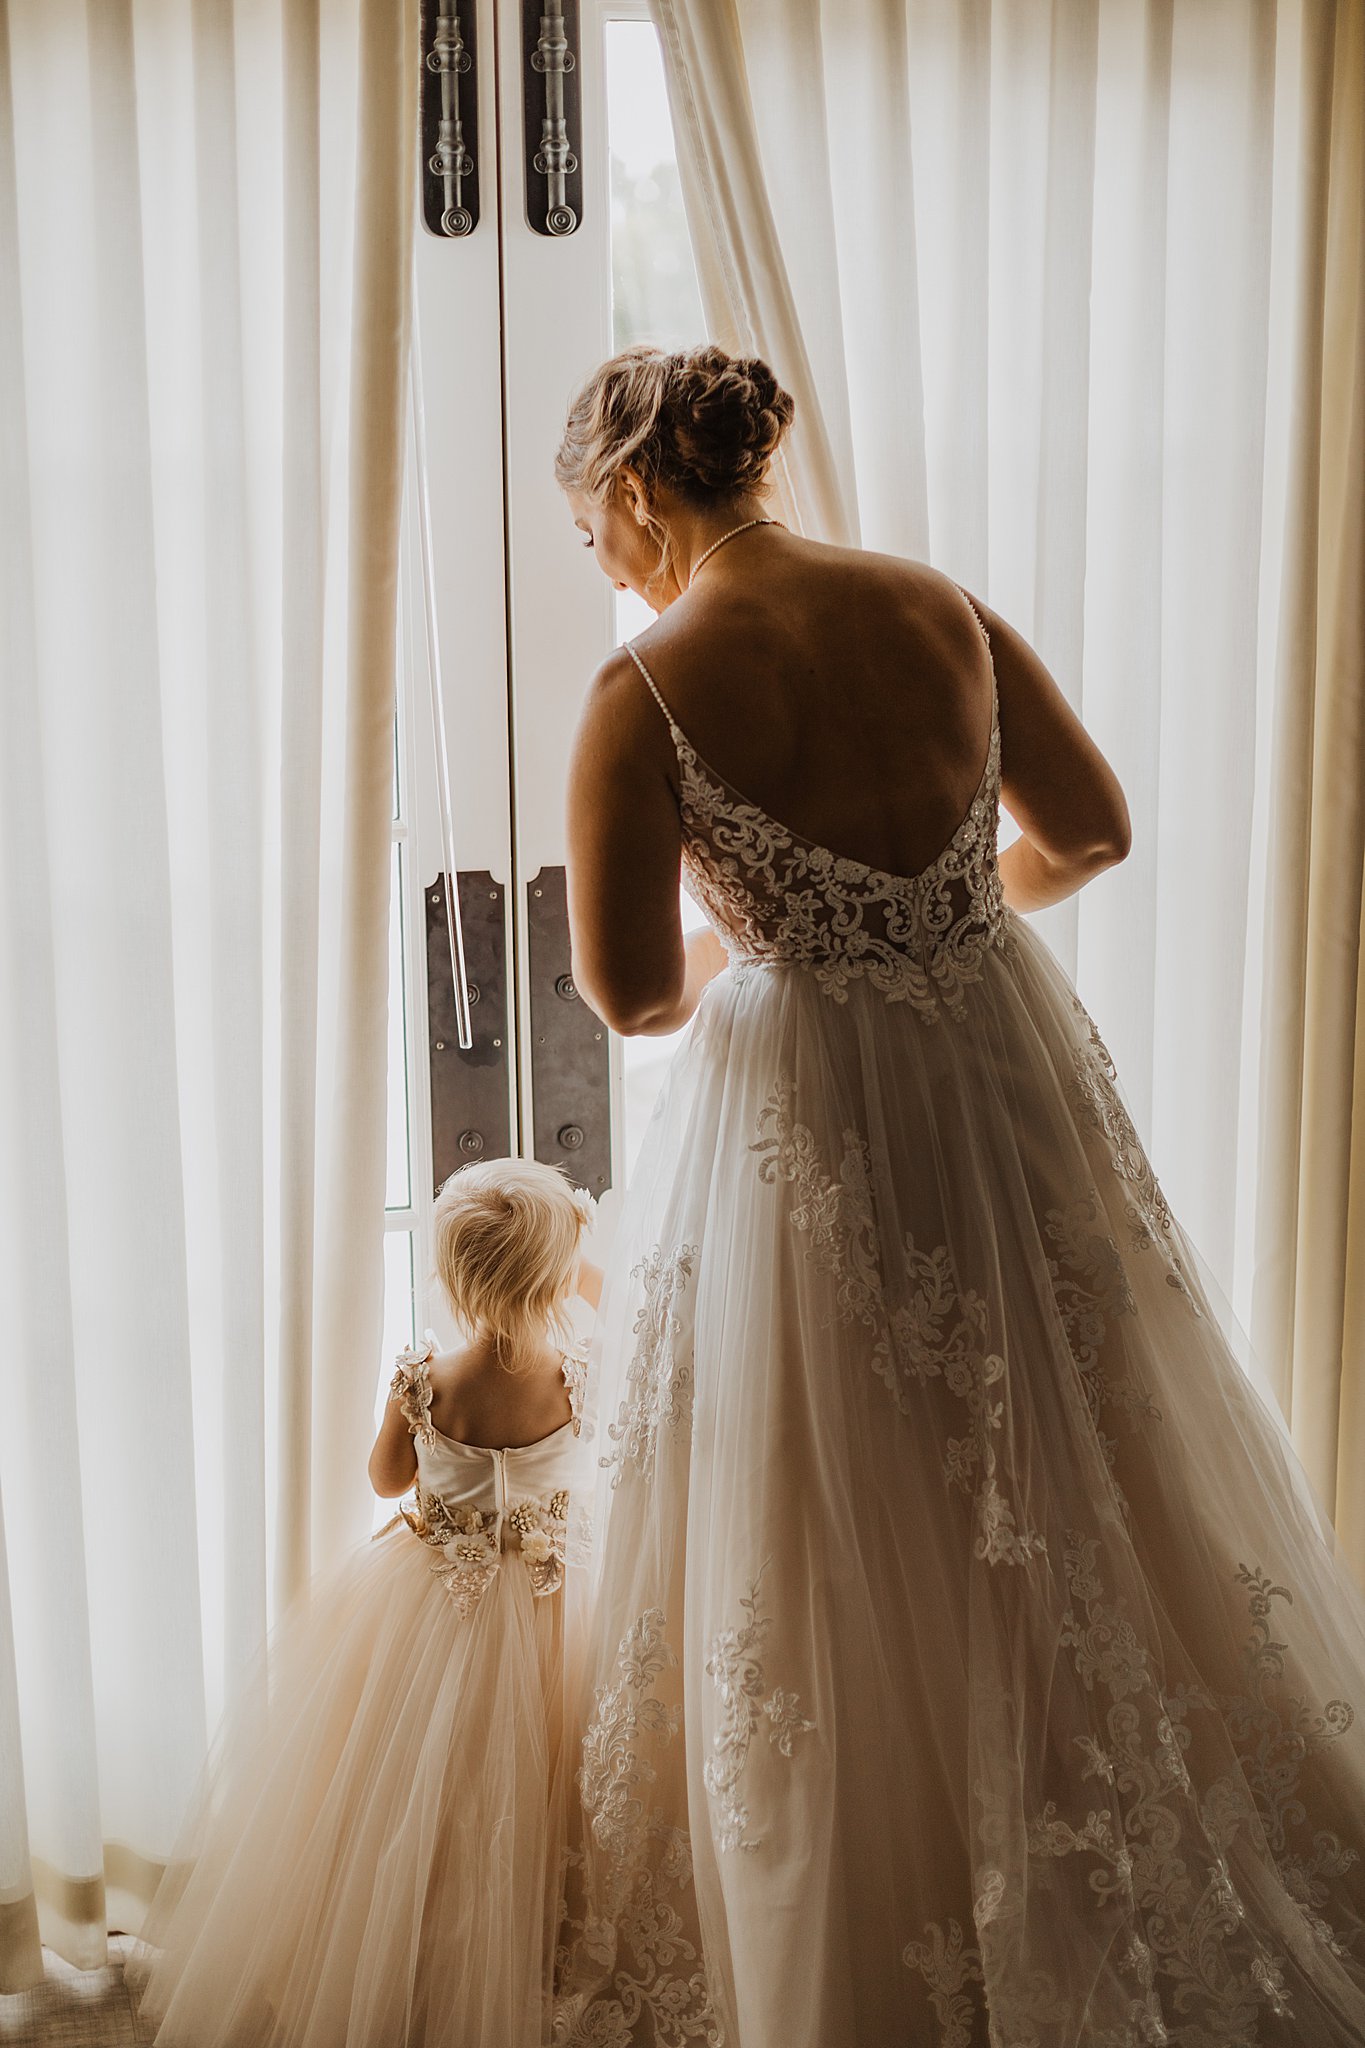 Bride and Flower Girl on Wedding Day | St. Louis Wedding